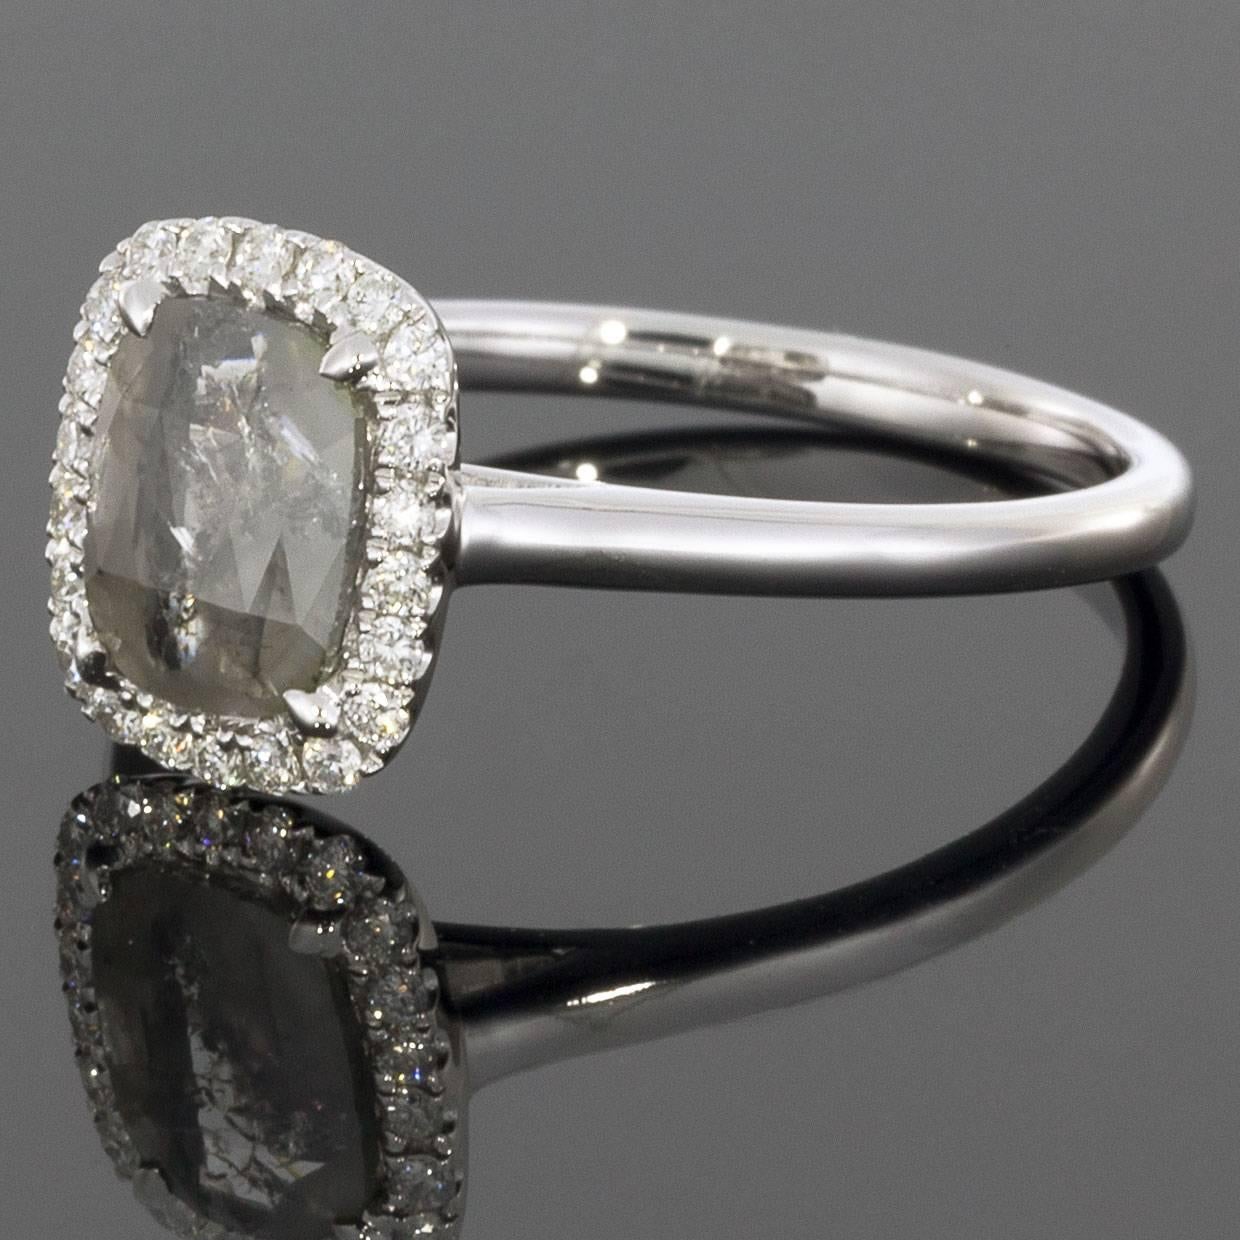 This beautiful grey diamond engagement ring is a unique twist on a classic halo style ring. The rough cut cushion shaped diamond is .42 carats and is surrounded by white round diamonds that weigh .14CTW.

DETAILS:
.56CTW diamonds
.42CT center